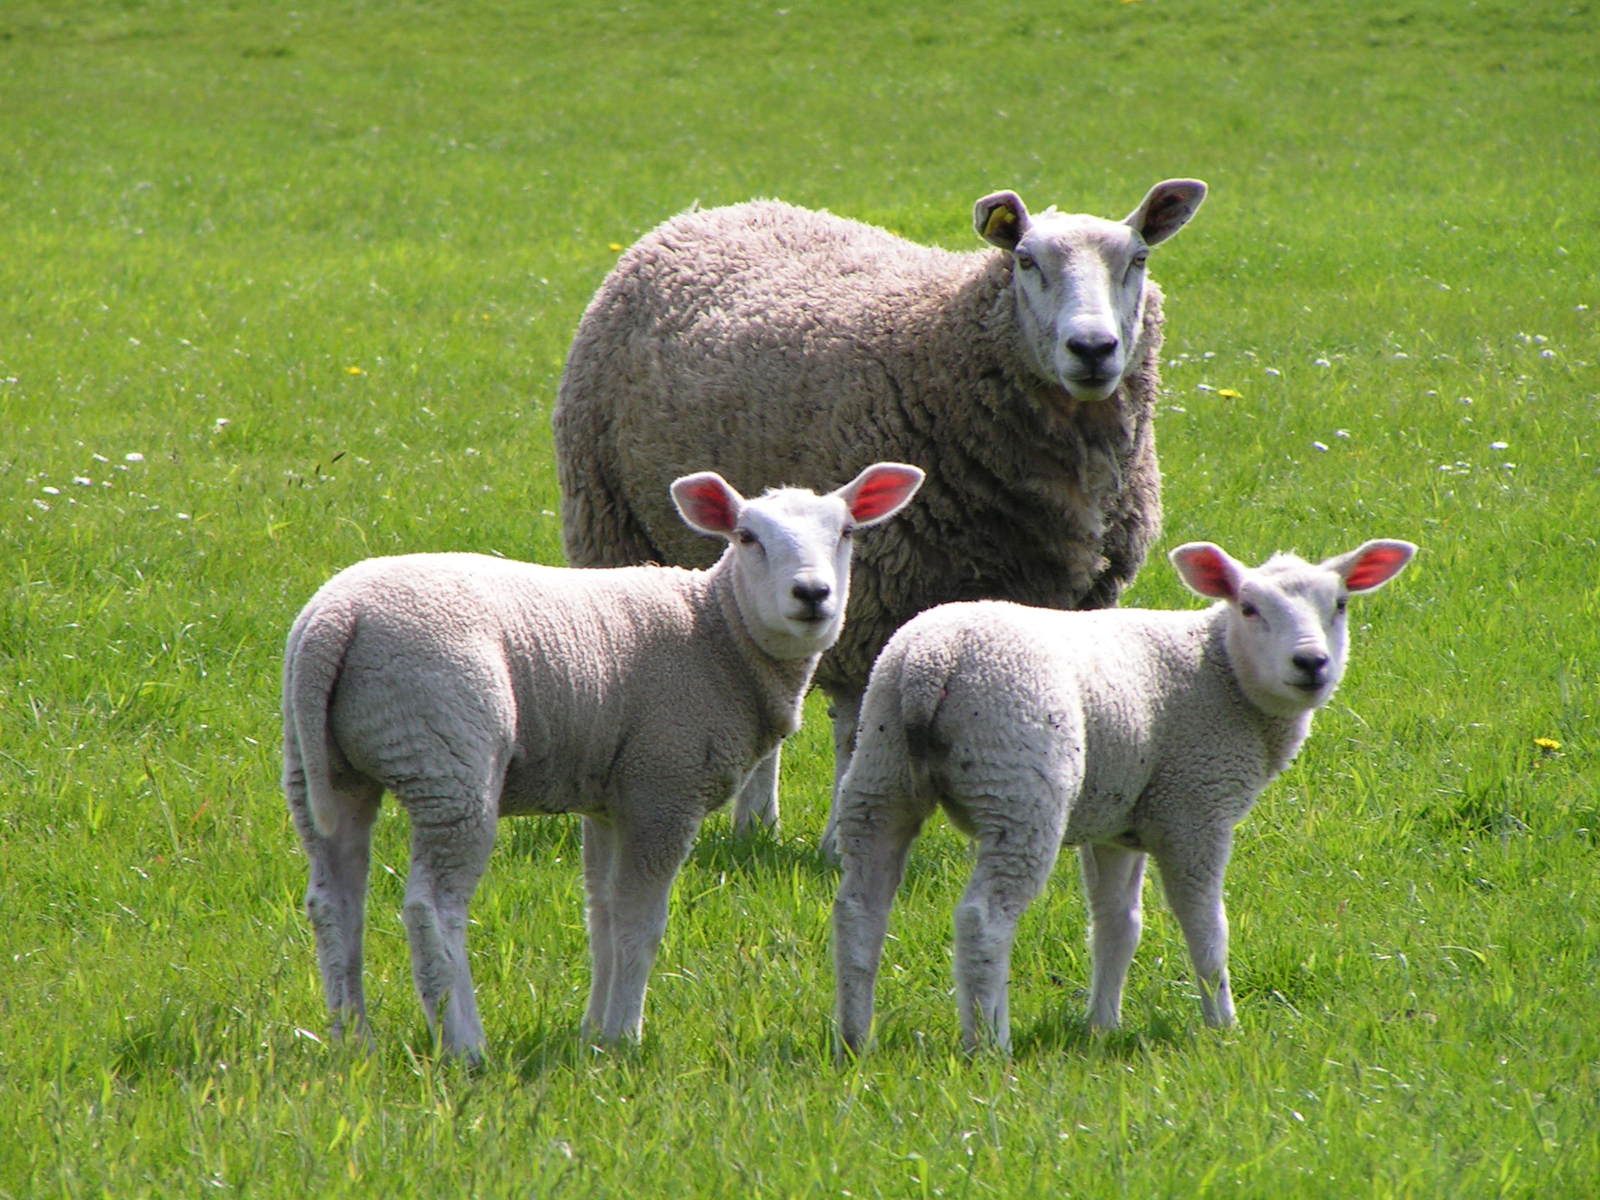 three baby lambs look on as a mother sheep stands beside them